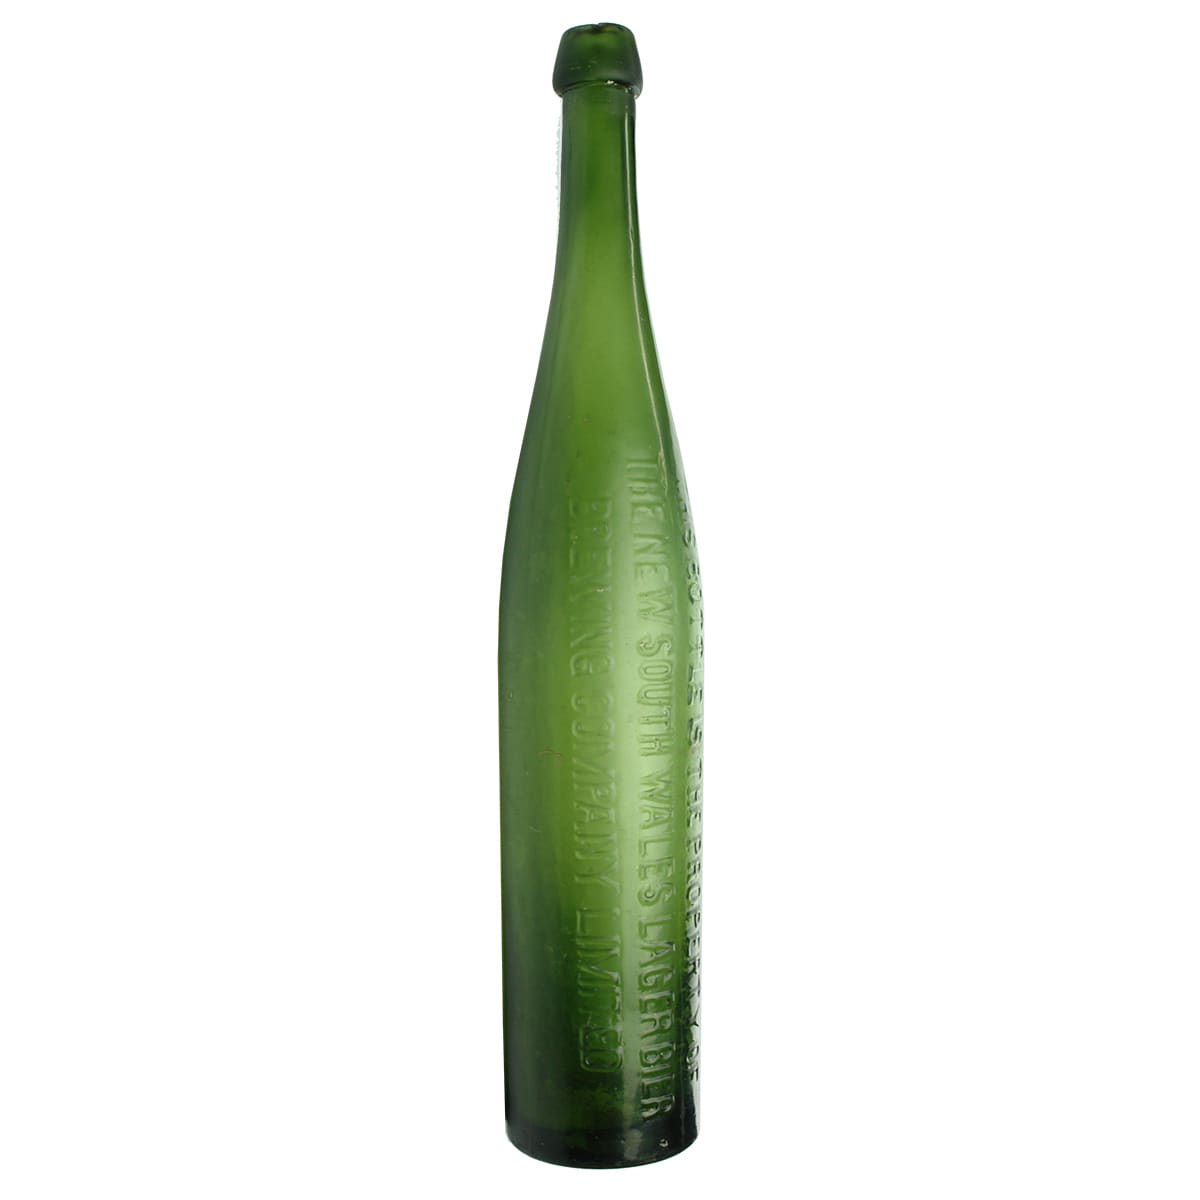 Beer. New South Wales Lager Bier. Tall Pilsener shape. Cork top. Green. 26 oz. (New South Wales)